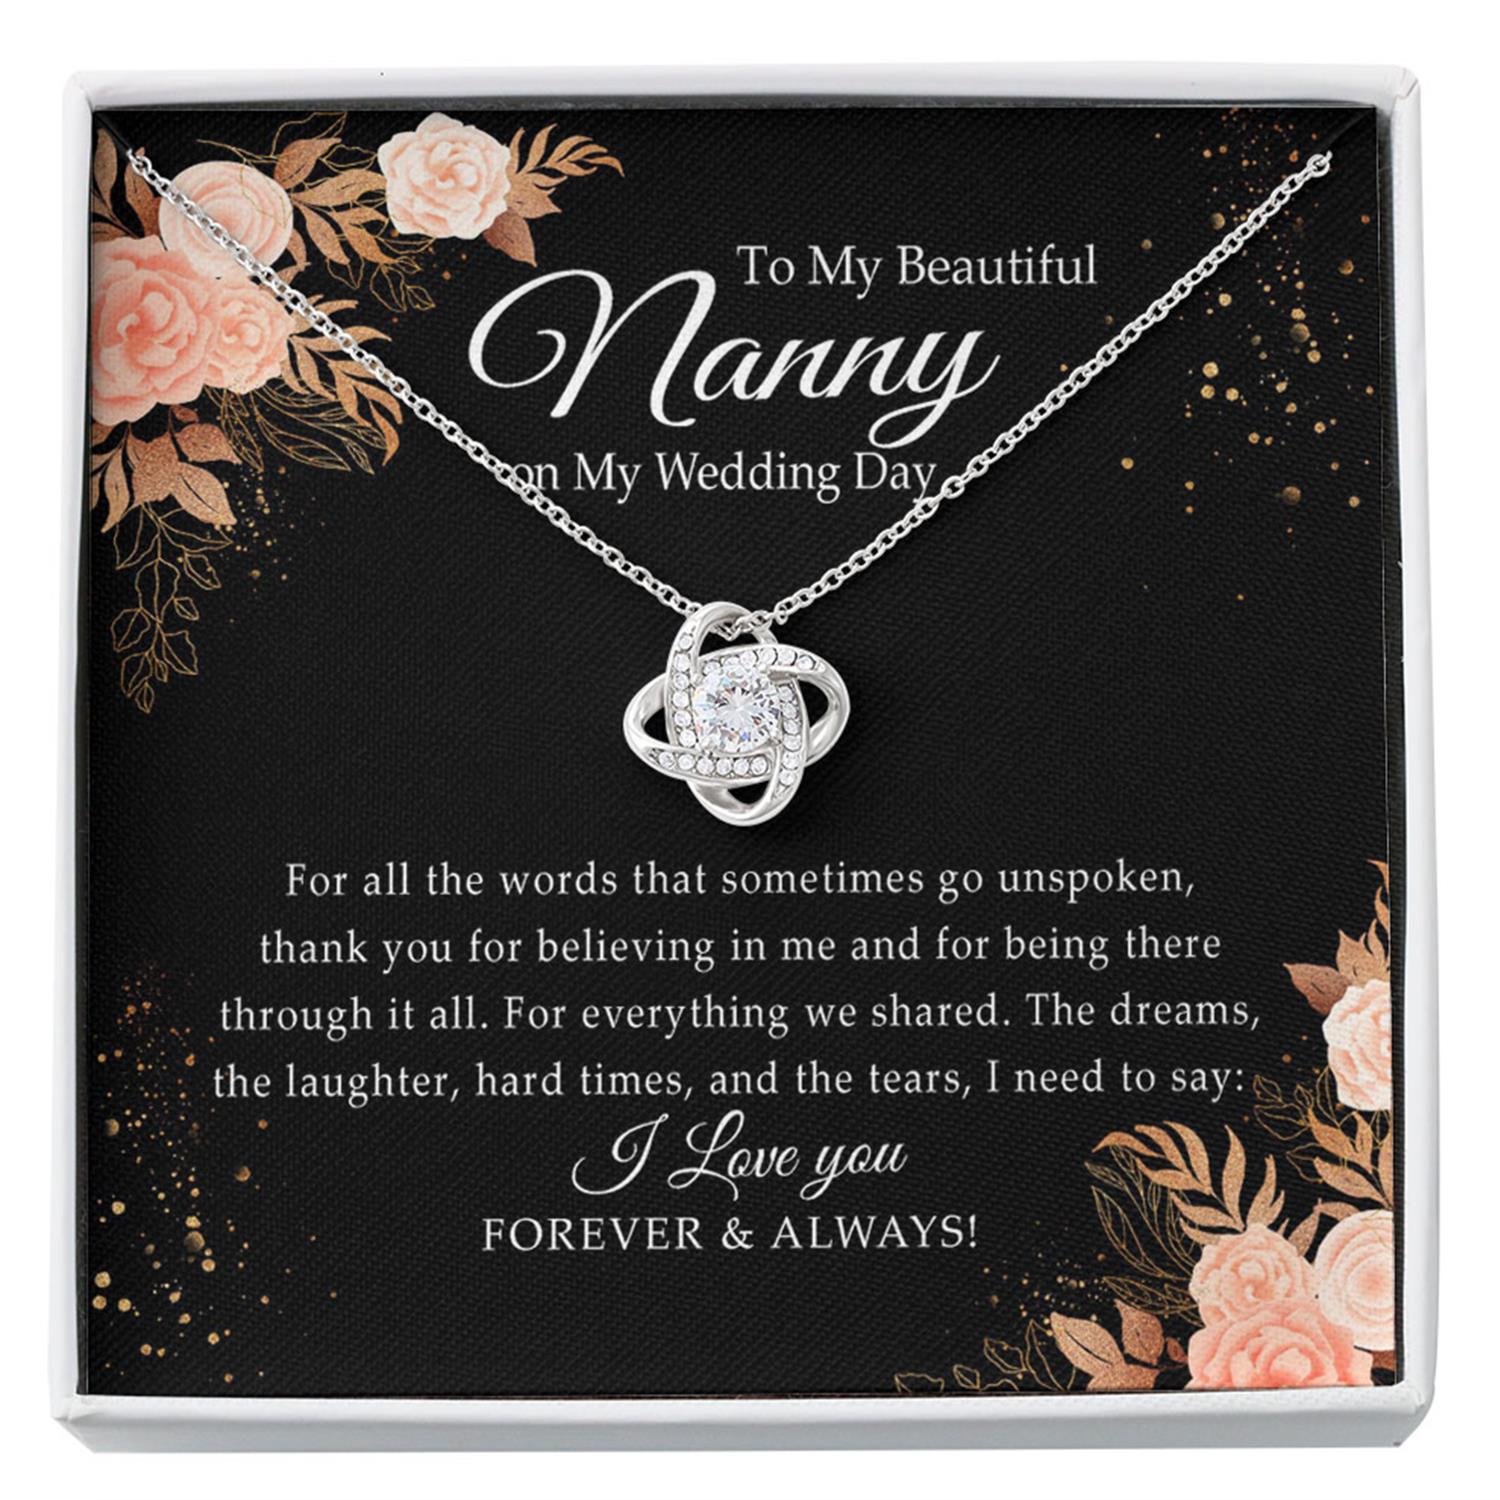 Grandmother Necklace, Nanny Of The Bride Gift, Gift From Bride To Grandmother On Wedding Day, Nanny Gifts, Wedding Gift For Nanny, Grandma, Custom Necklace